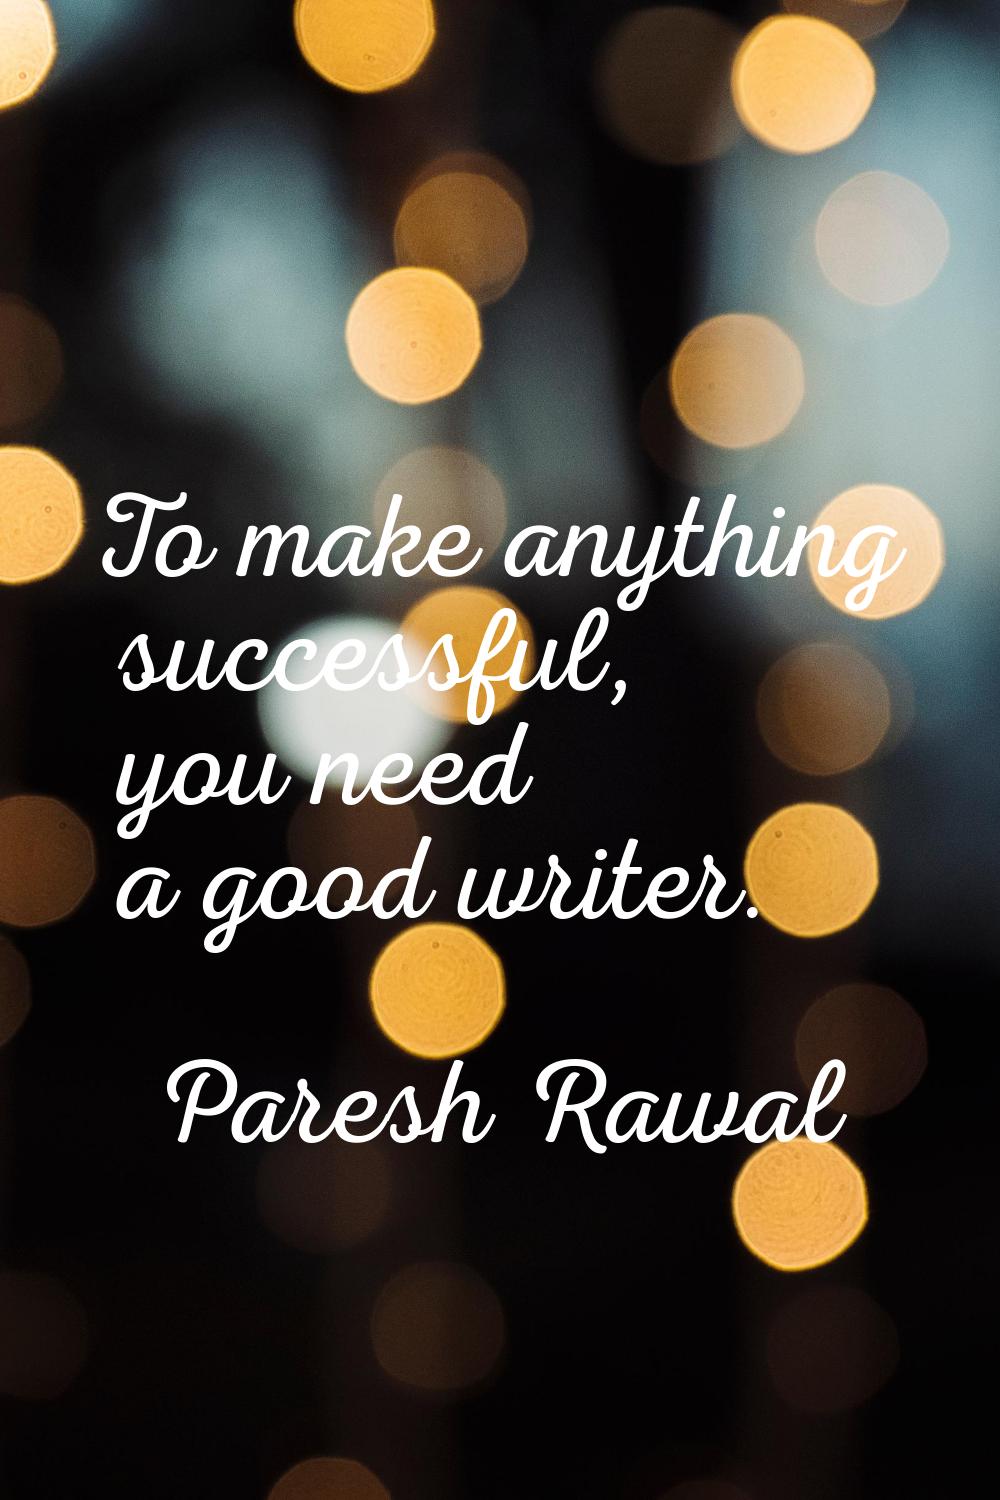 To make anything successful, you need a good writer.